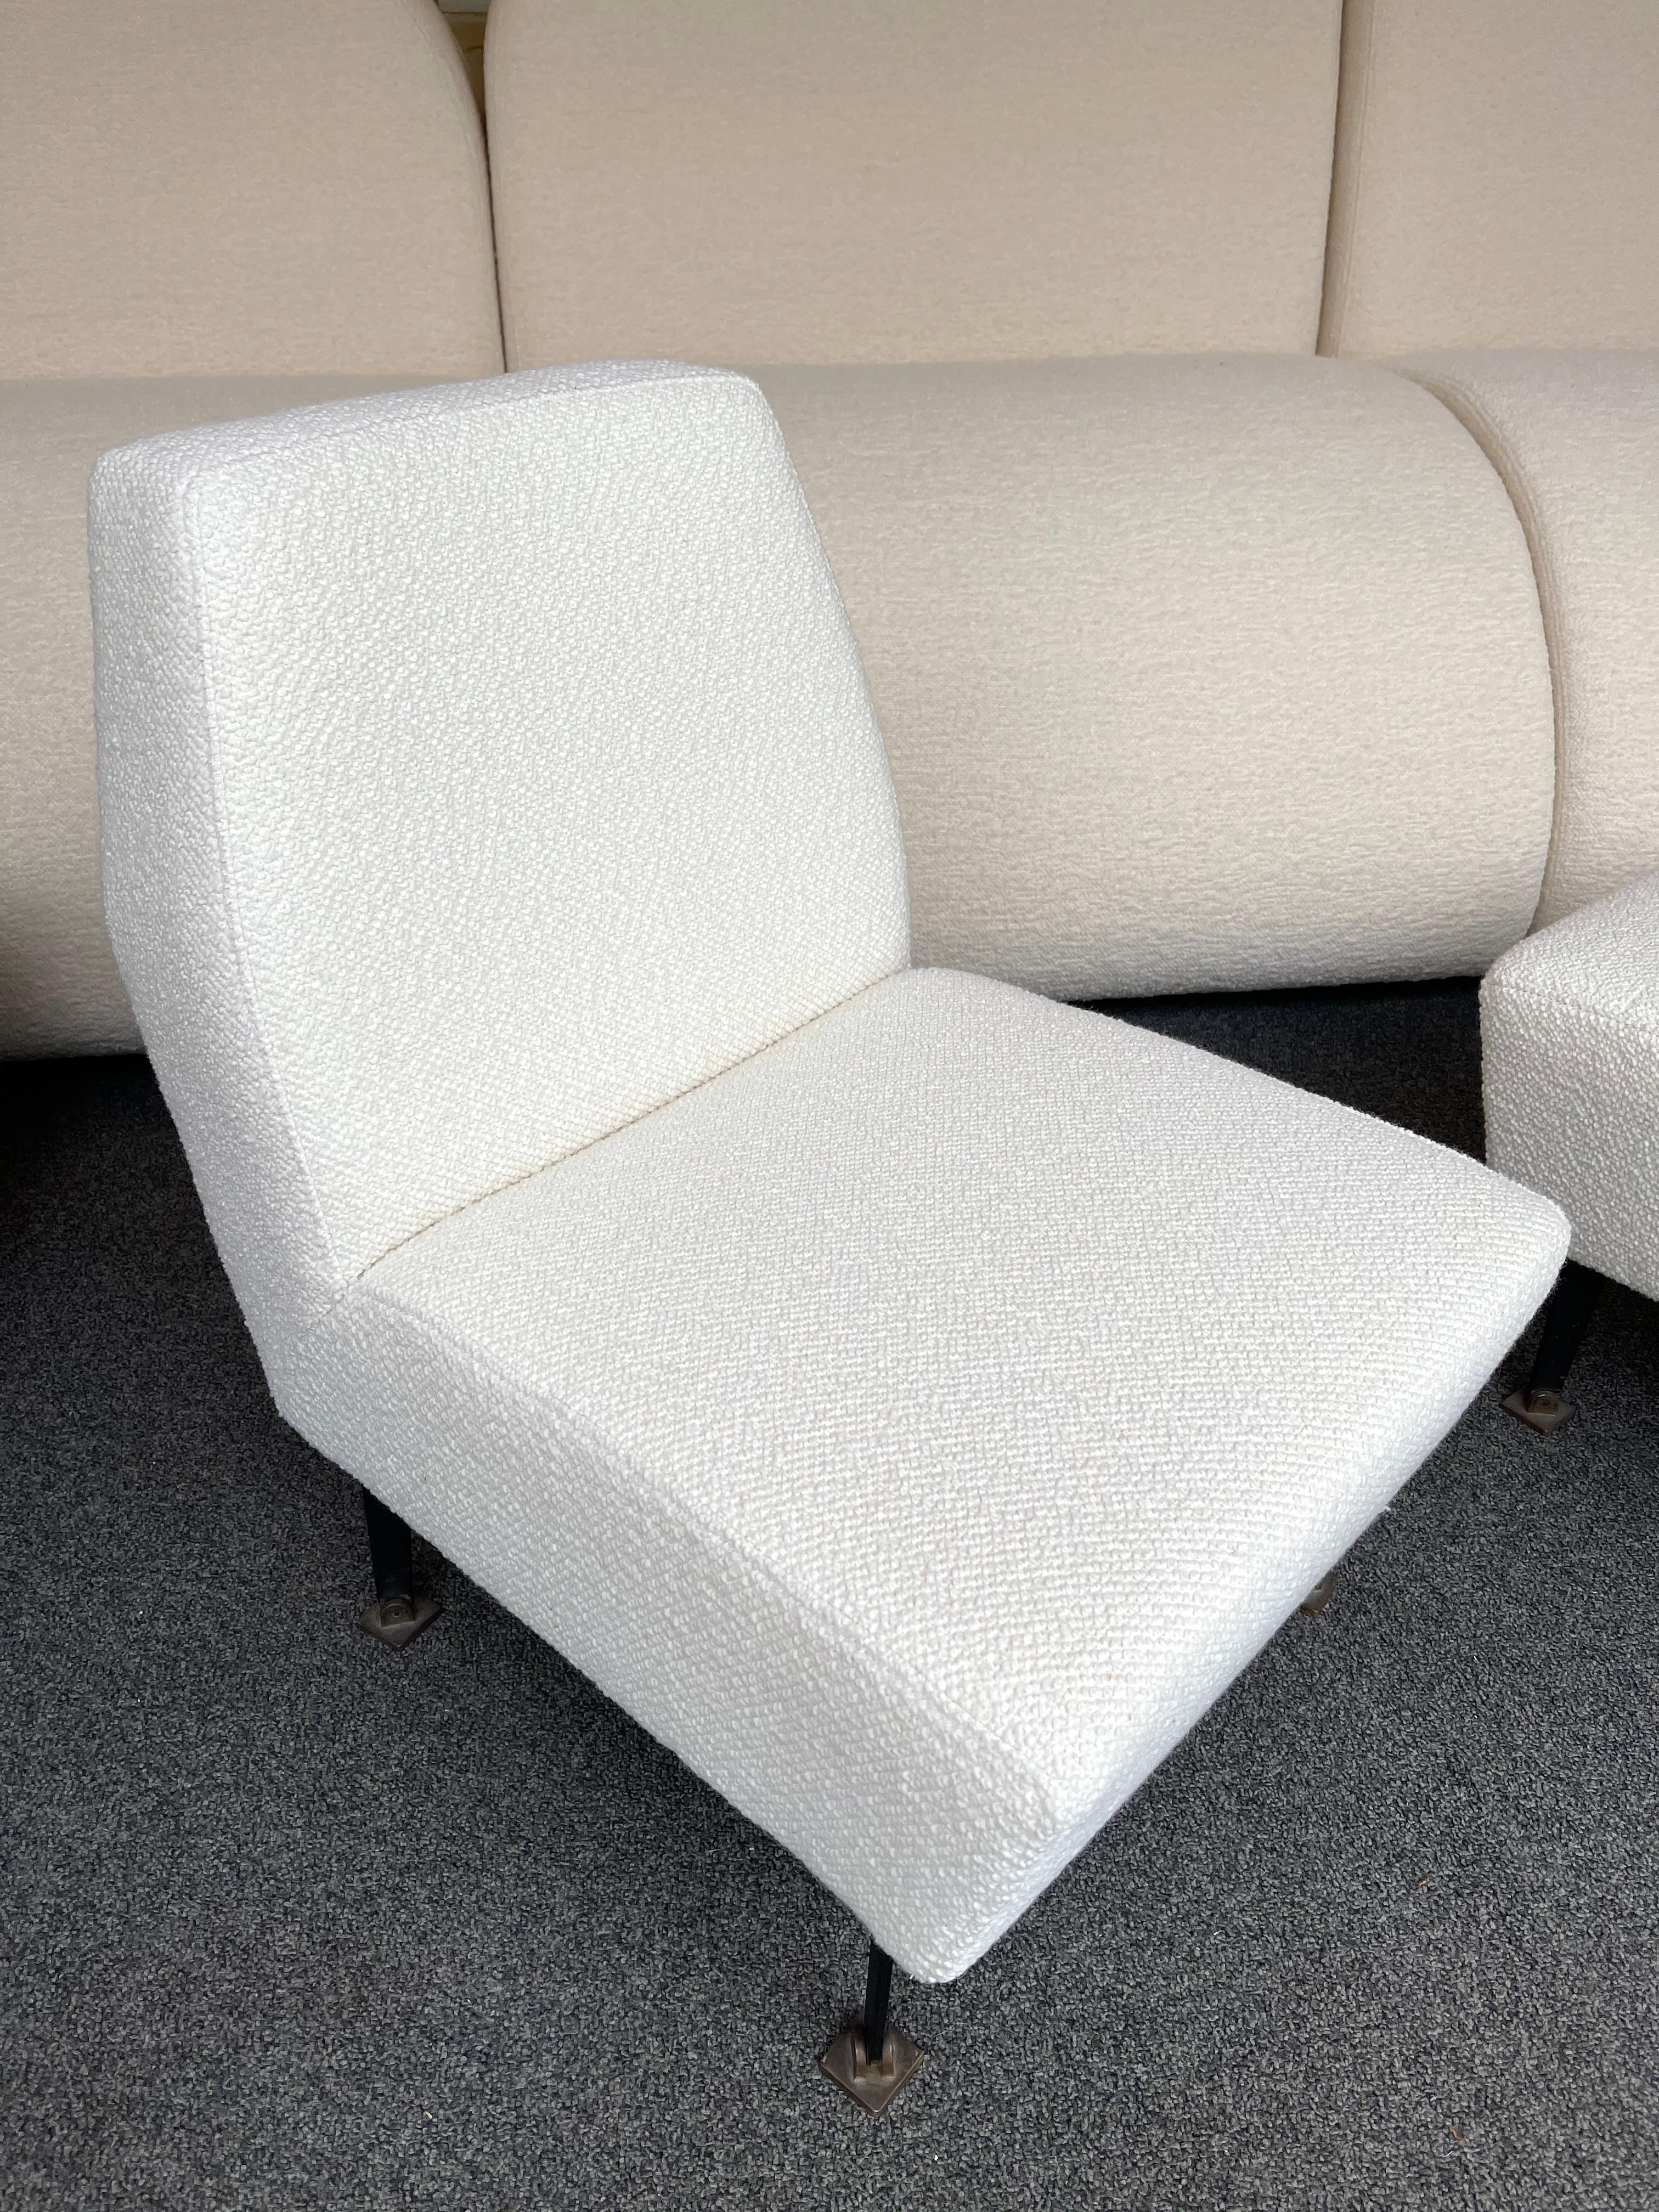 Pair of Slipper Chairs Bouclé Fabric by Studio APA for Lenzi, Italy, 1960s For Sale 1